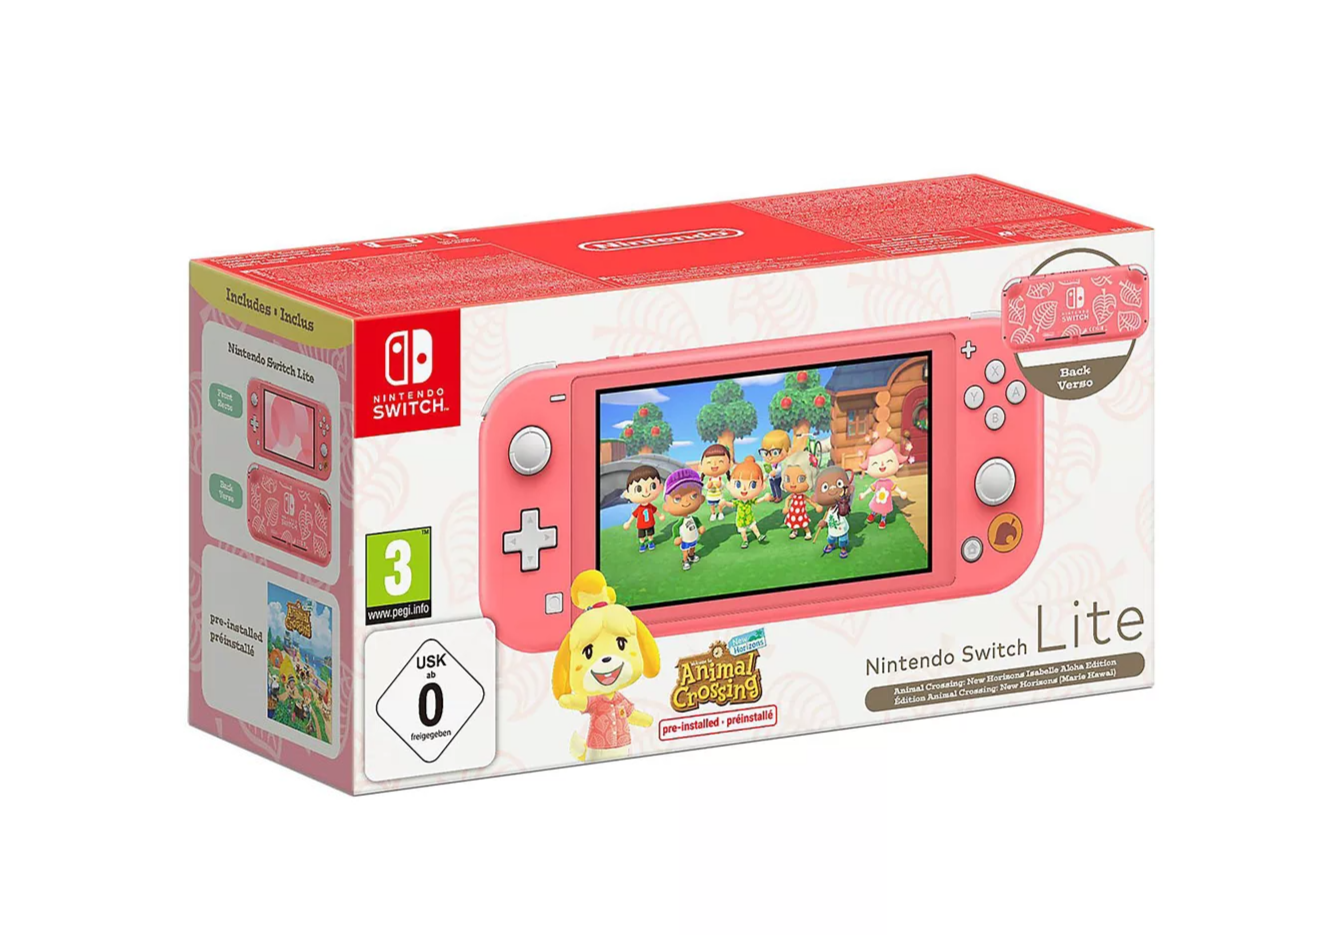 This special edition Nintendo Switch Lite comes with a free copy of Animal Crossing